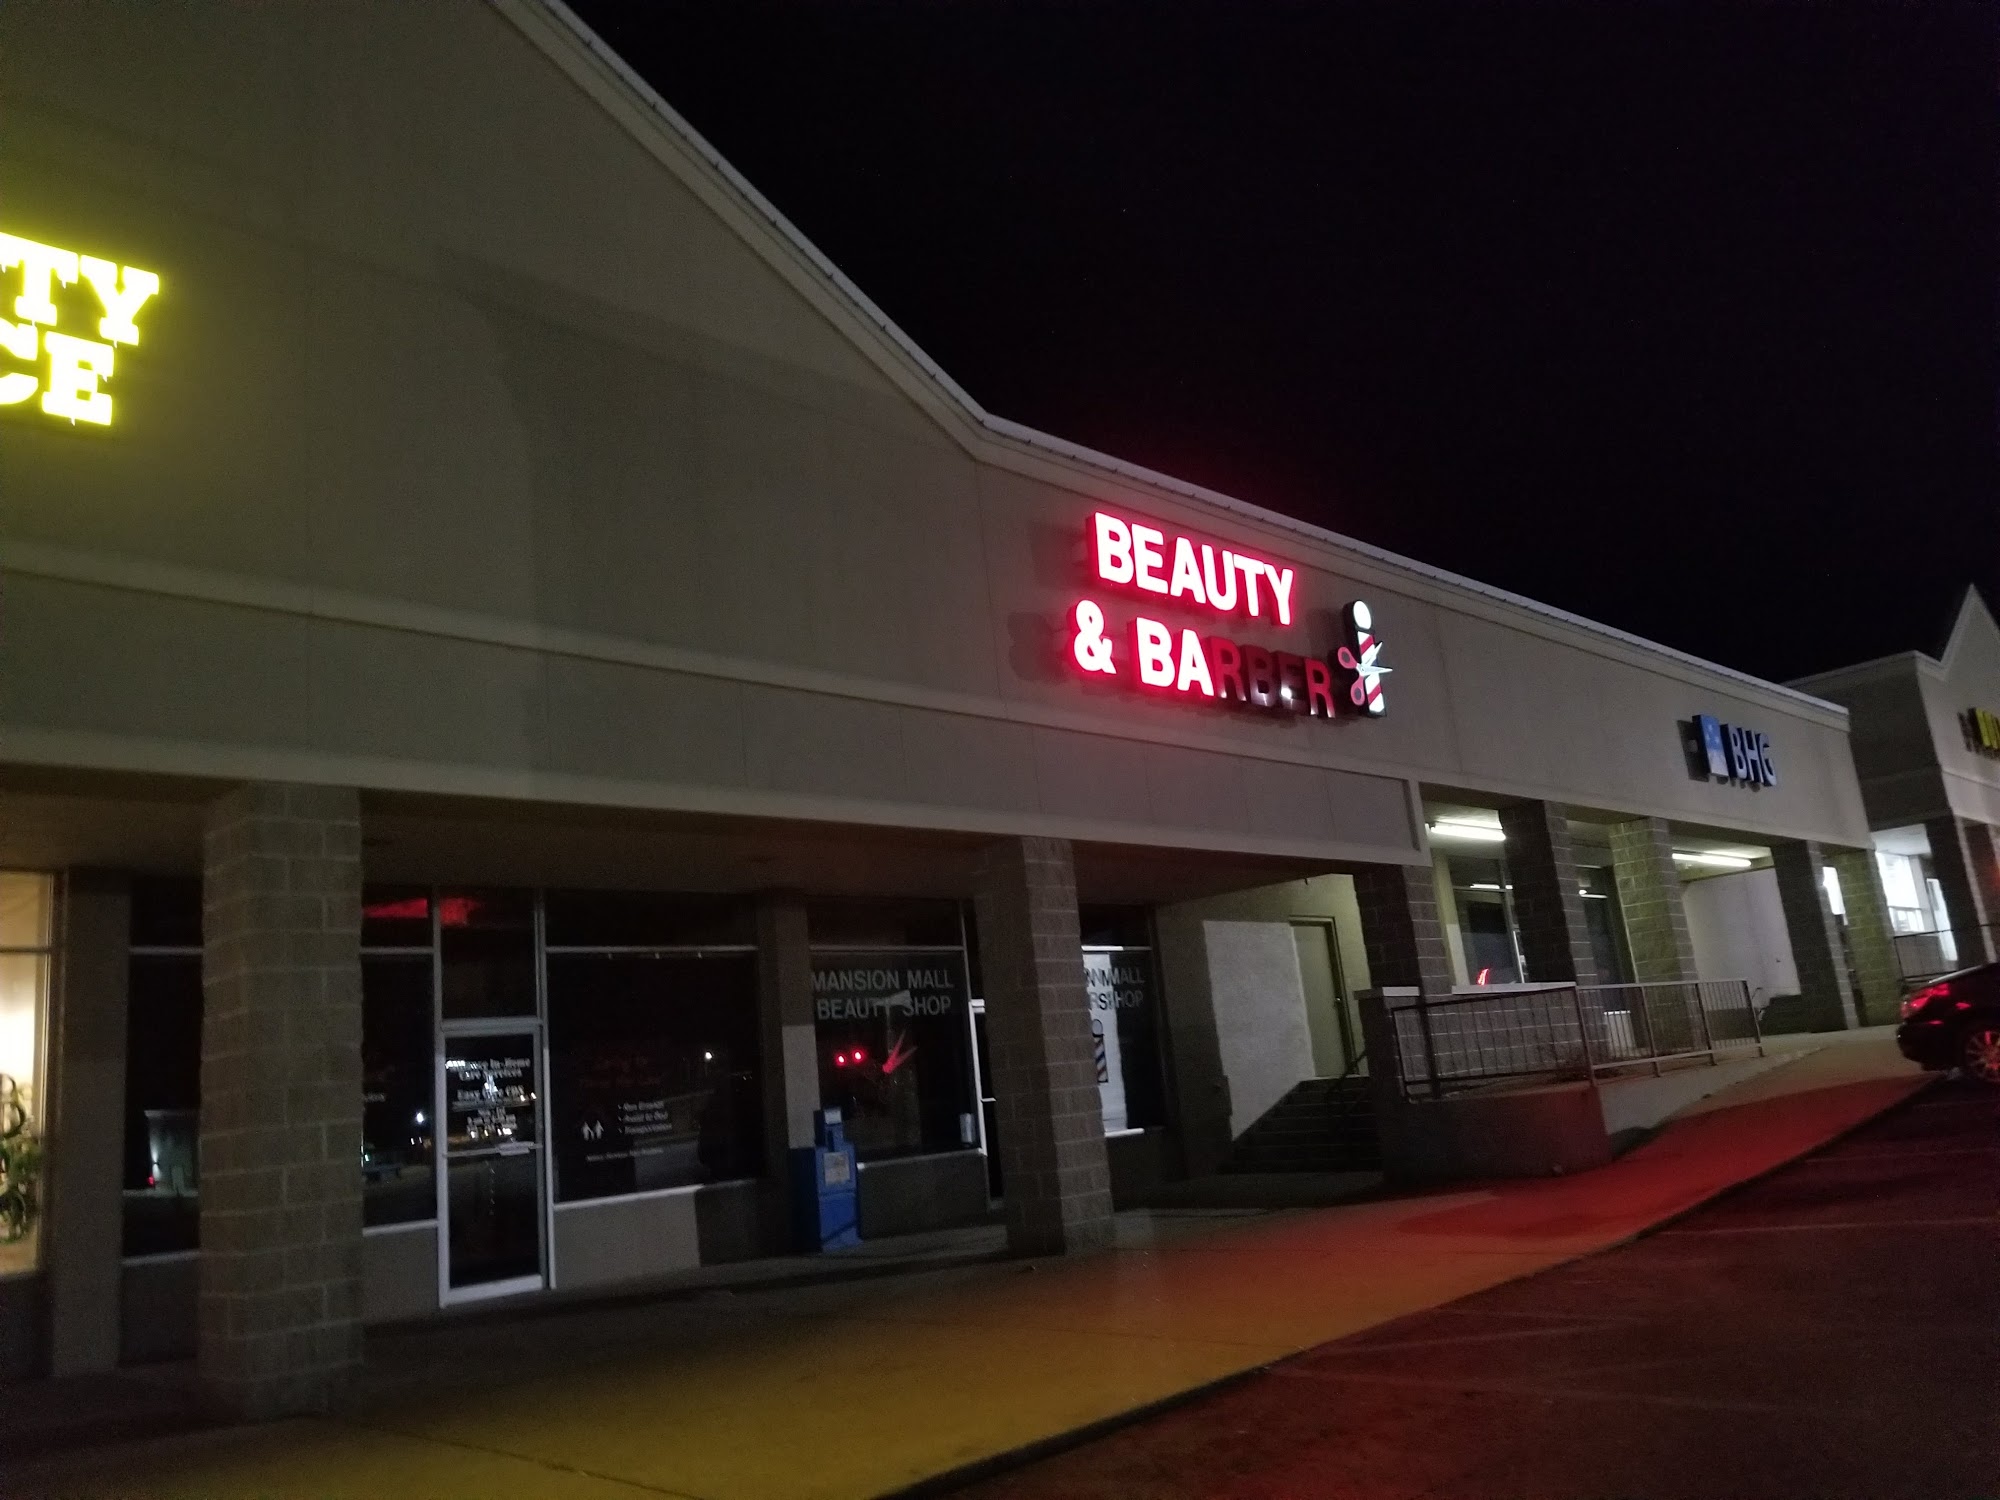 Mansion Mall Beauty & Barber Shop